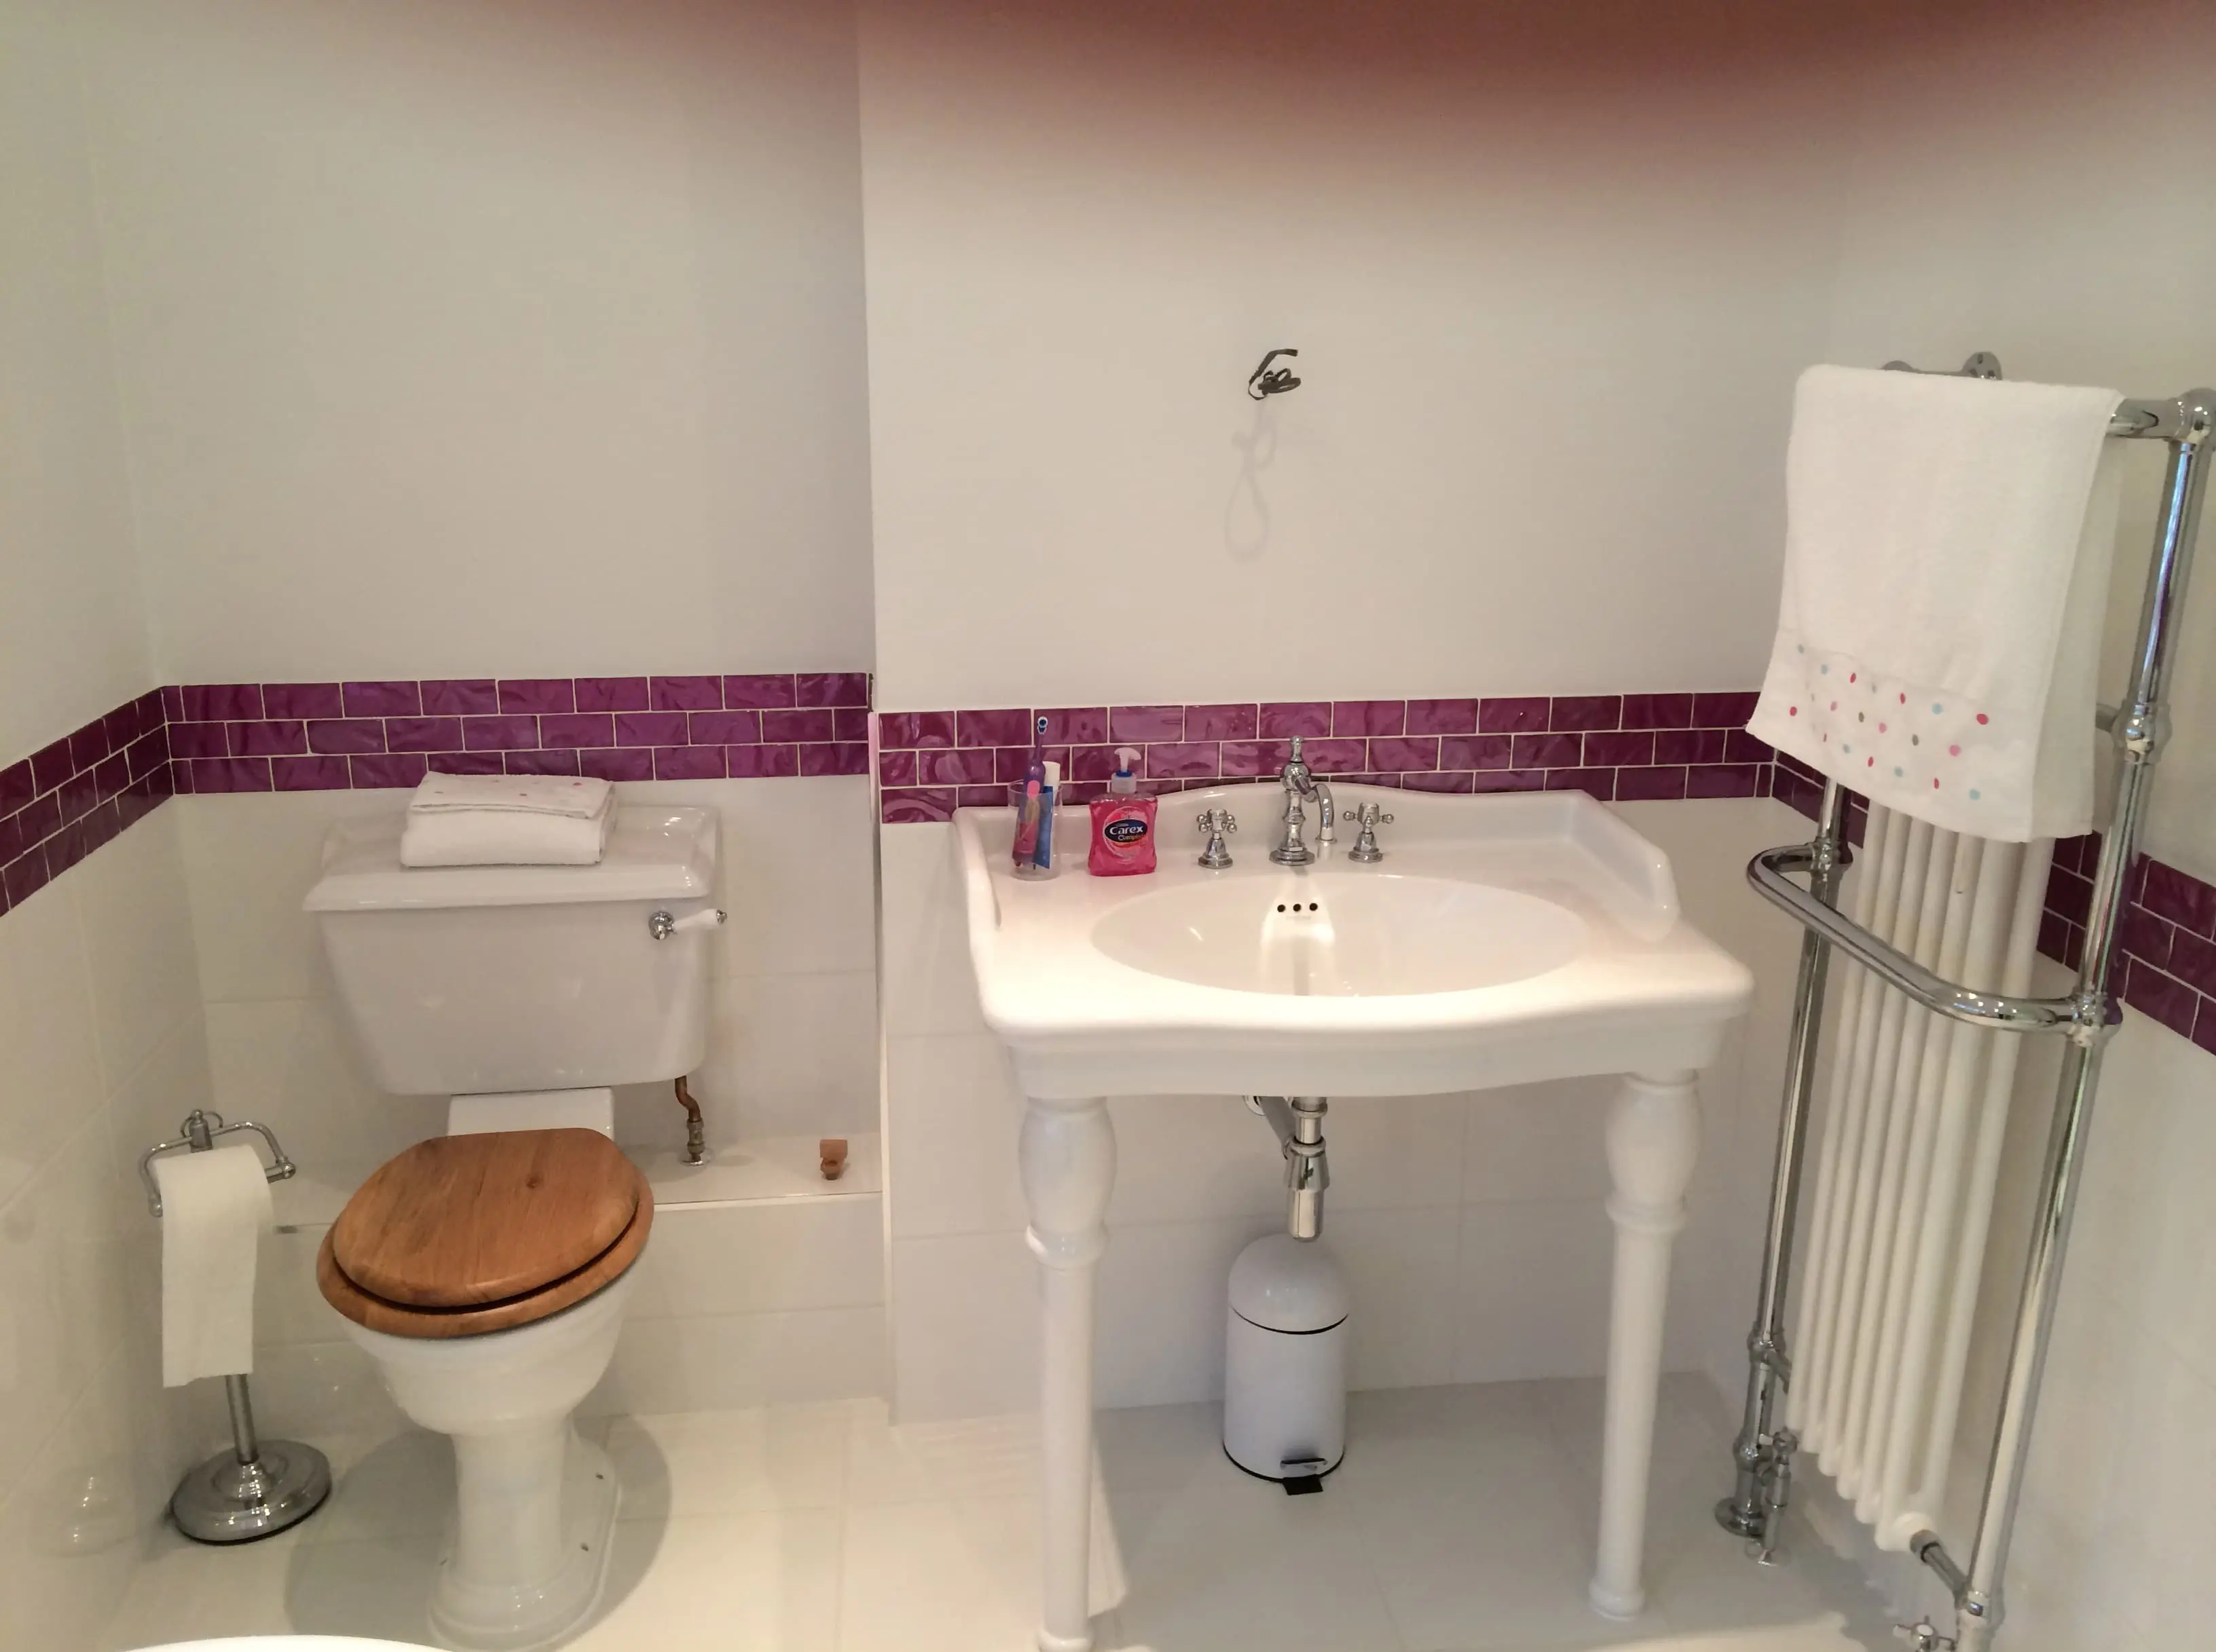 With&nbsp;over 42 years of experience, I can supply and fit bathroom fittings at competitive prices in the following areas:ReadingShinfieldCalcotWokinghamBracknellWoodleyAnd many areas more in and around&nbsp;Woodley!Whether you want me to install a&nbsp;new wet room&nbsp;or just&nbsp;re-tile&nbsp;your existing bathroom, I can give your home a new look. I take great pride in providing a personalised service to&nbsp;suit your budget and taste.&nbsp;